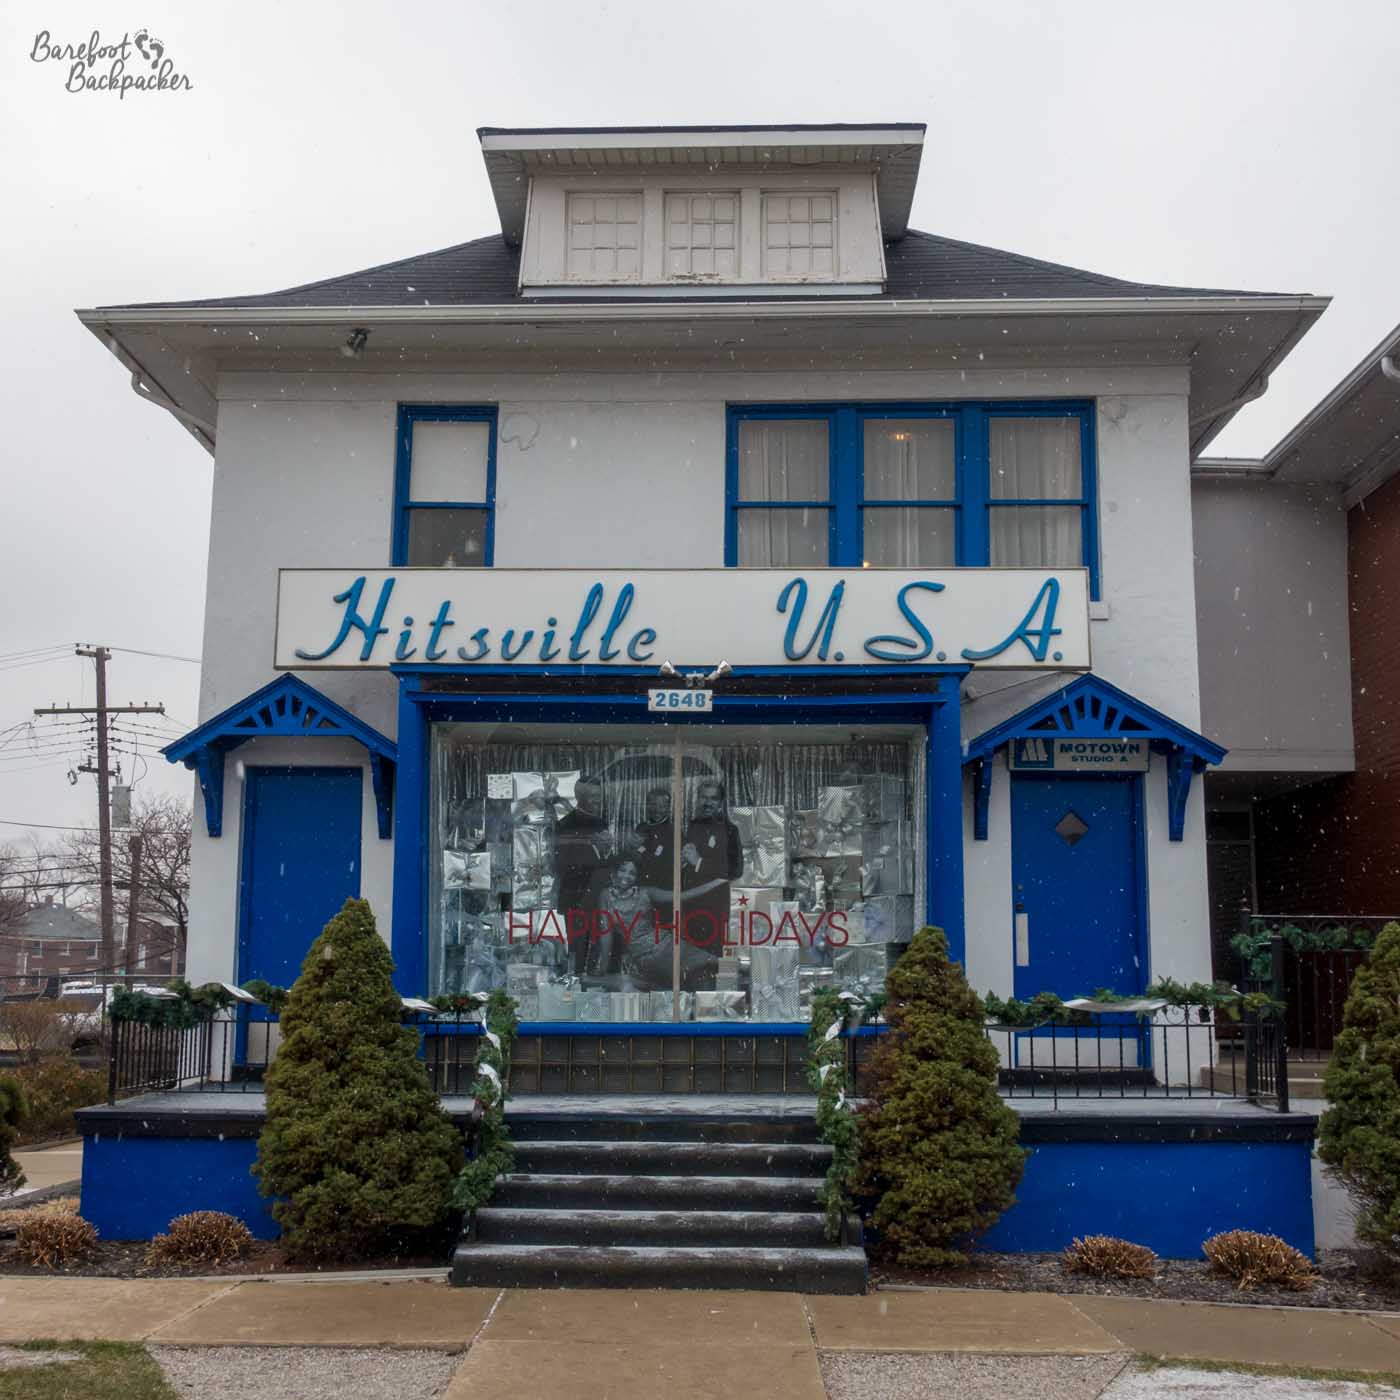 The outside of the Motown Museum in Detroit.